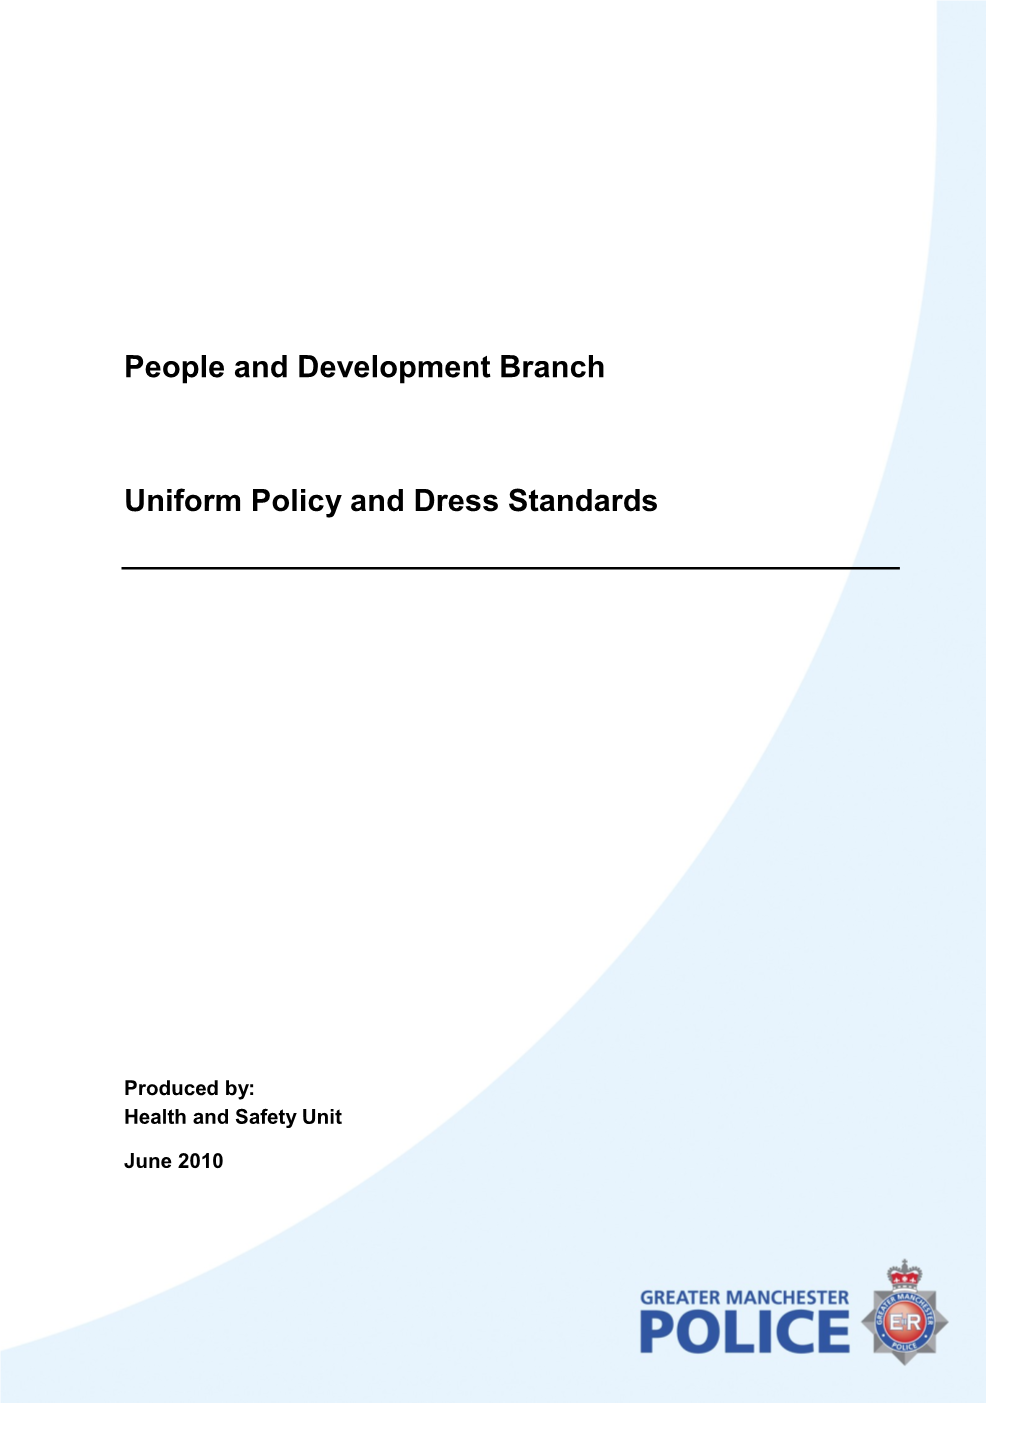 People and Development Branch Uniform Policy and Dress Standards